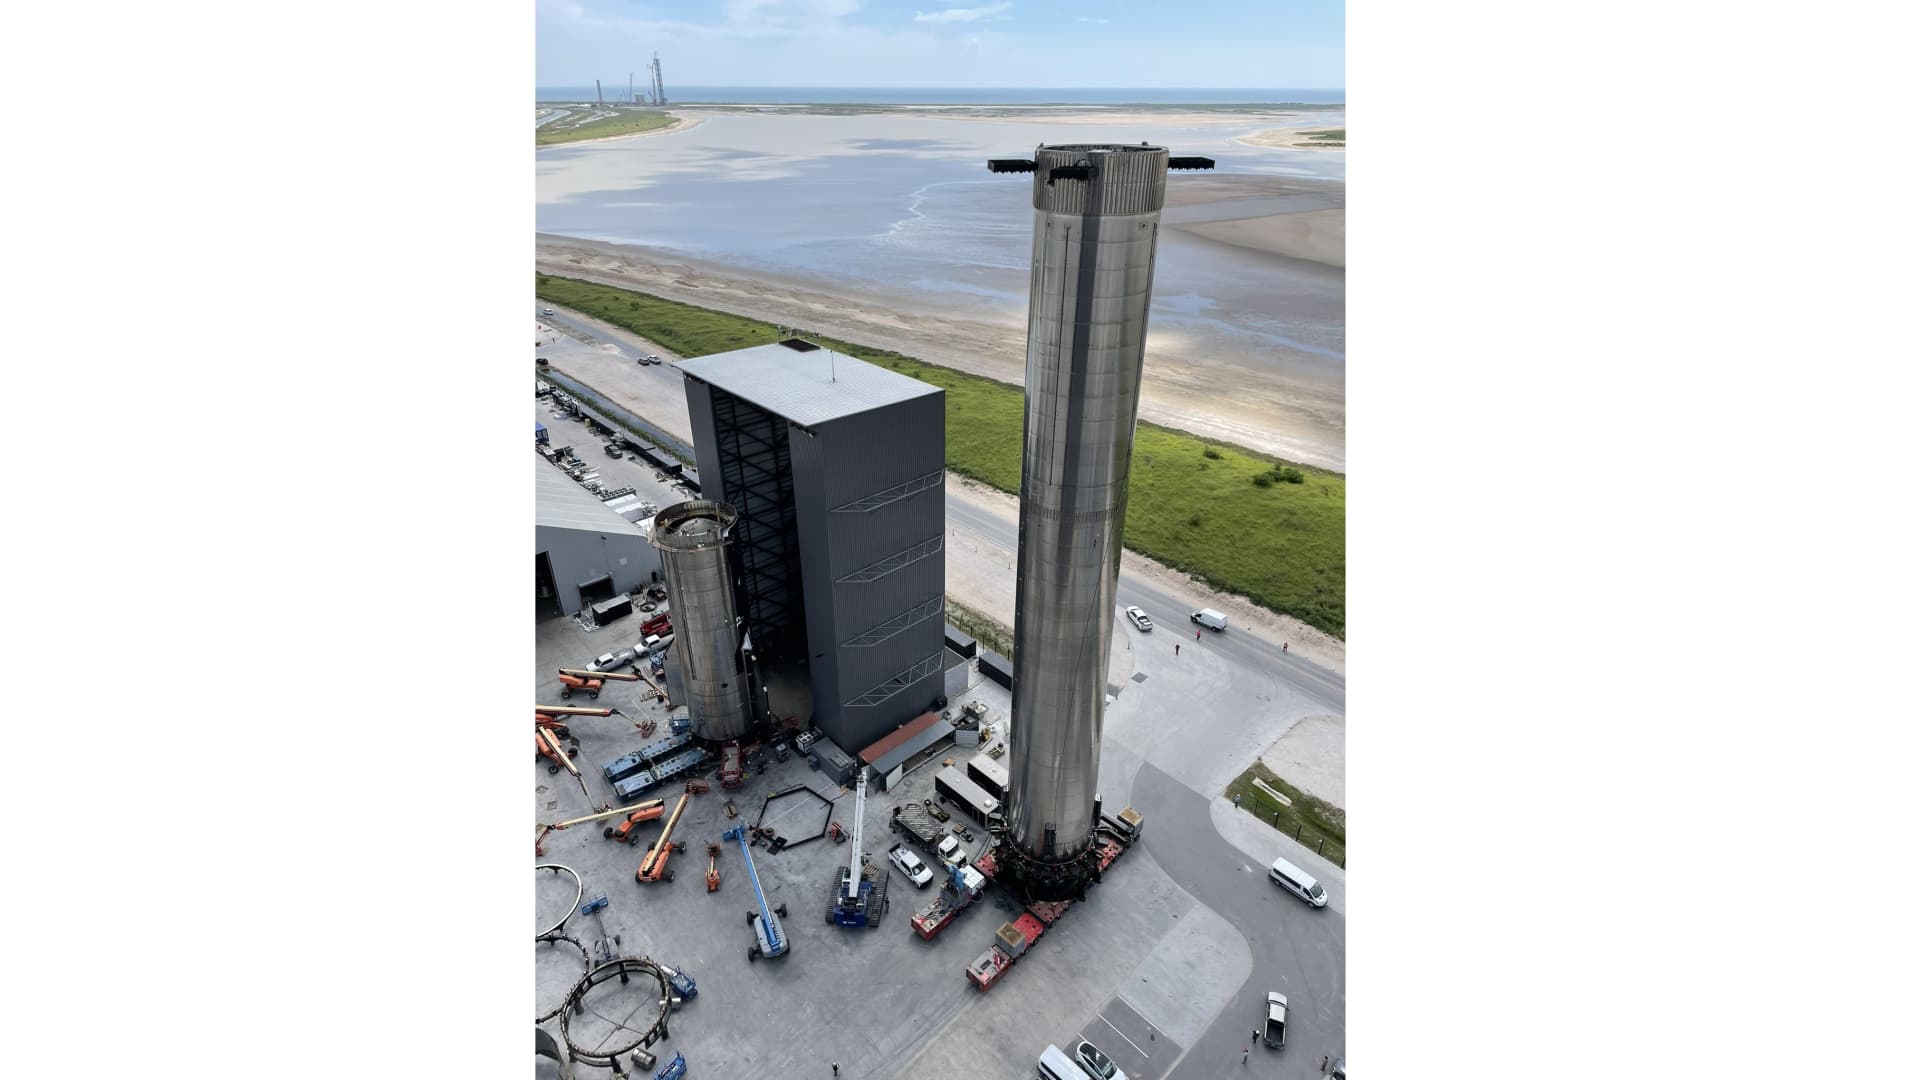 SpaceX rolls out Super Heavy Booster 4 in preparation for the company's first orbital Starship launch.